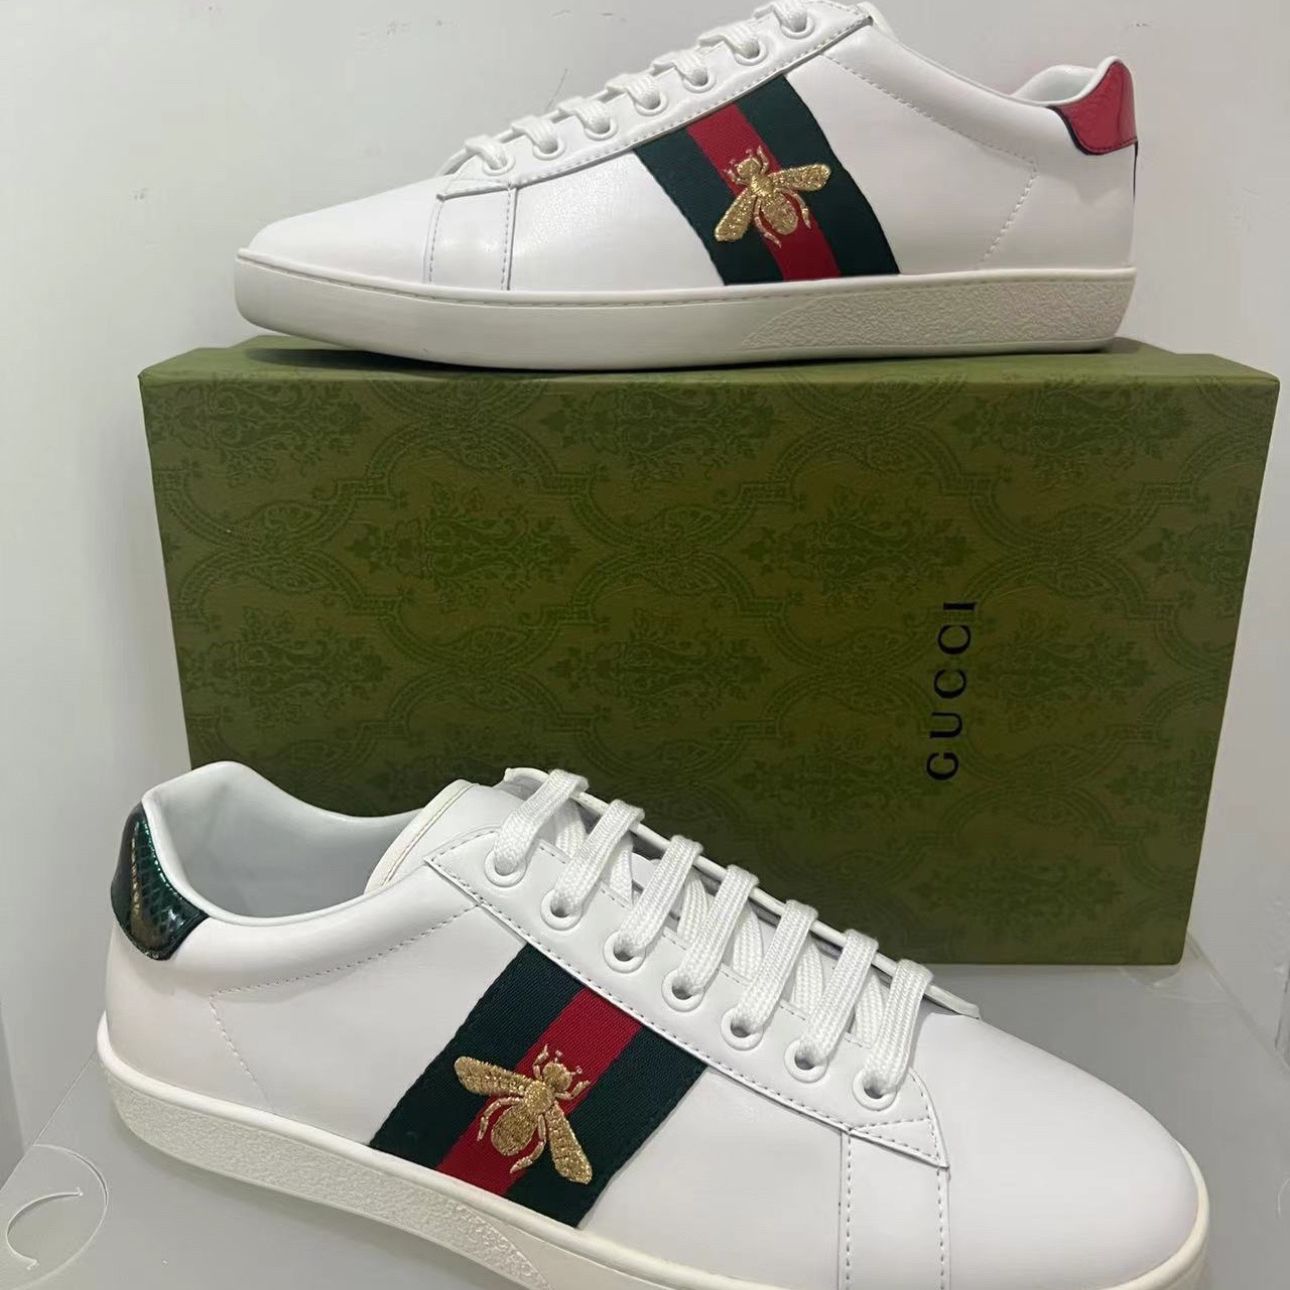 Gucci Shoes Sz 8.5 And 9